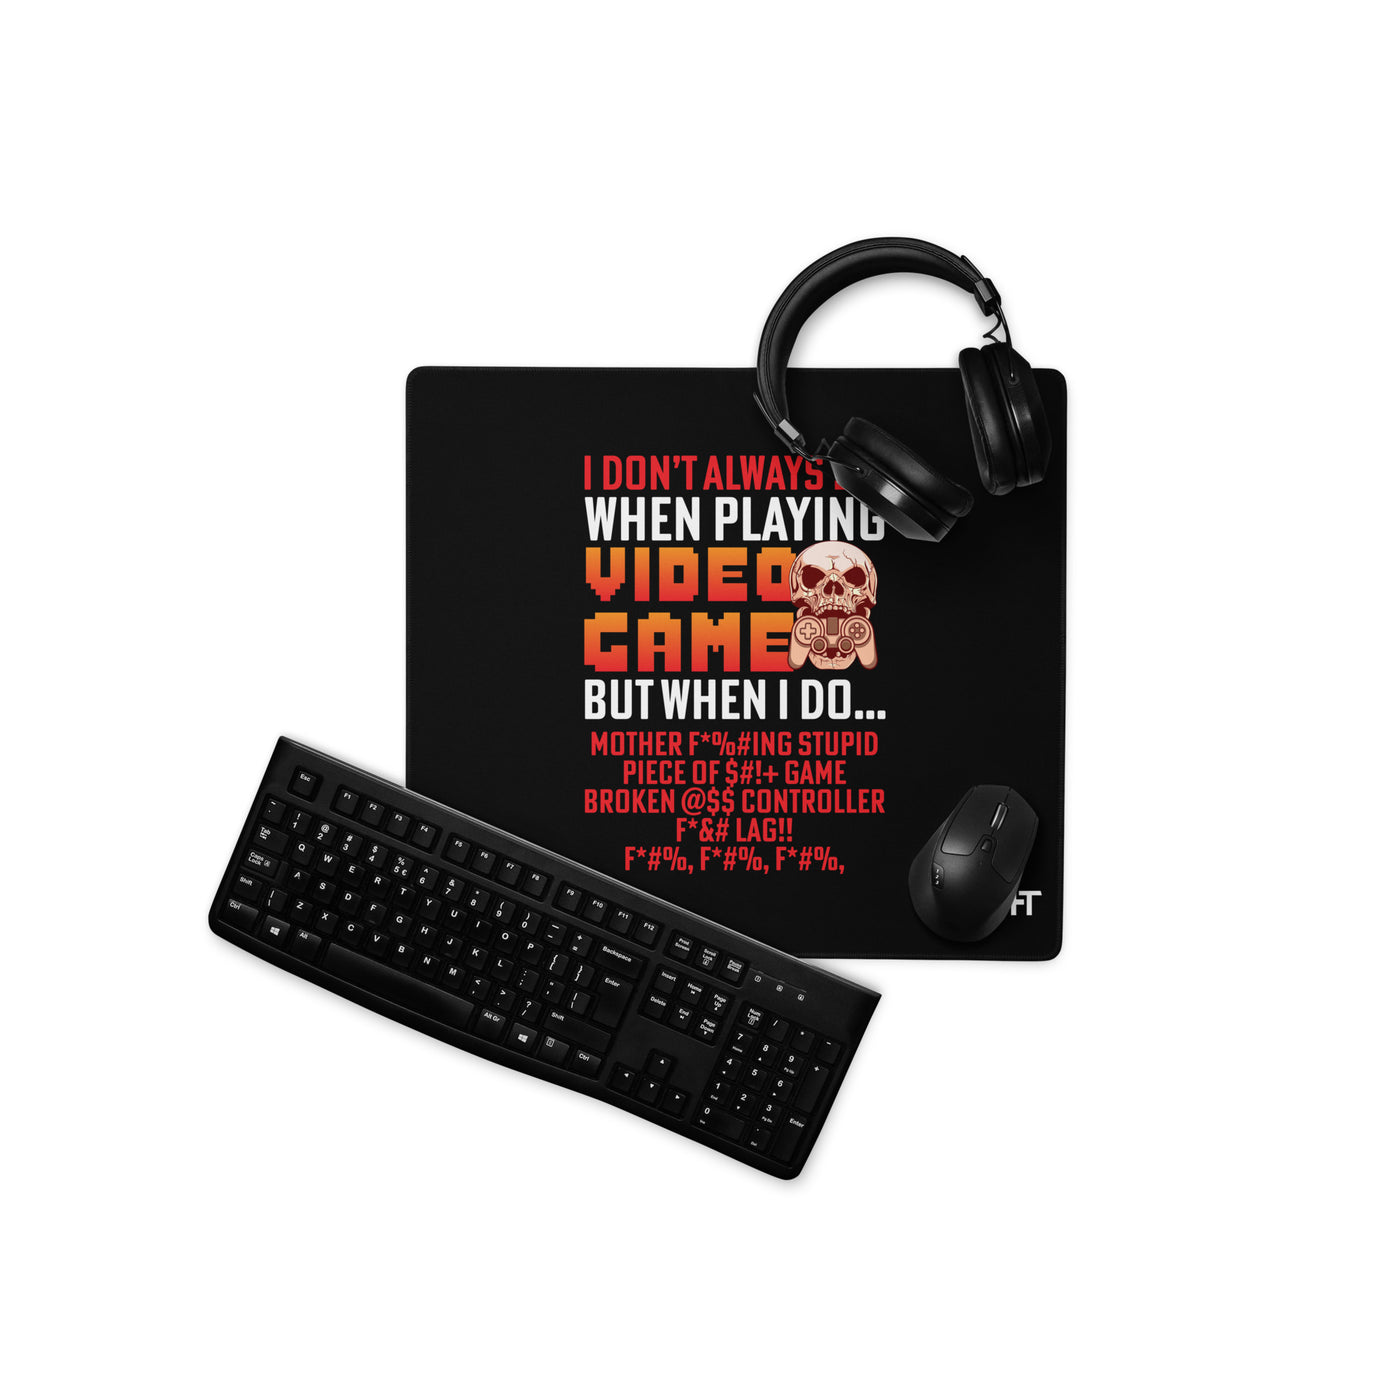 I don't always die when playing Video Games, when I do - Desk Mat